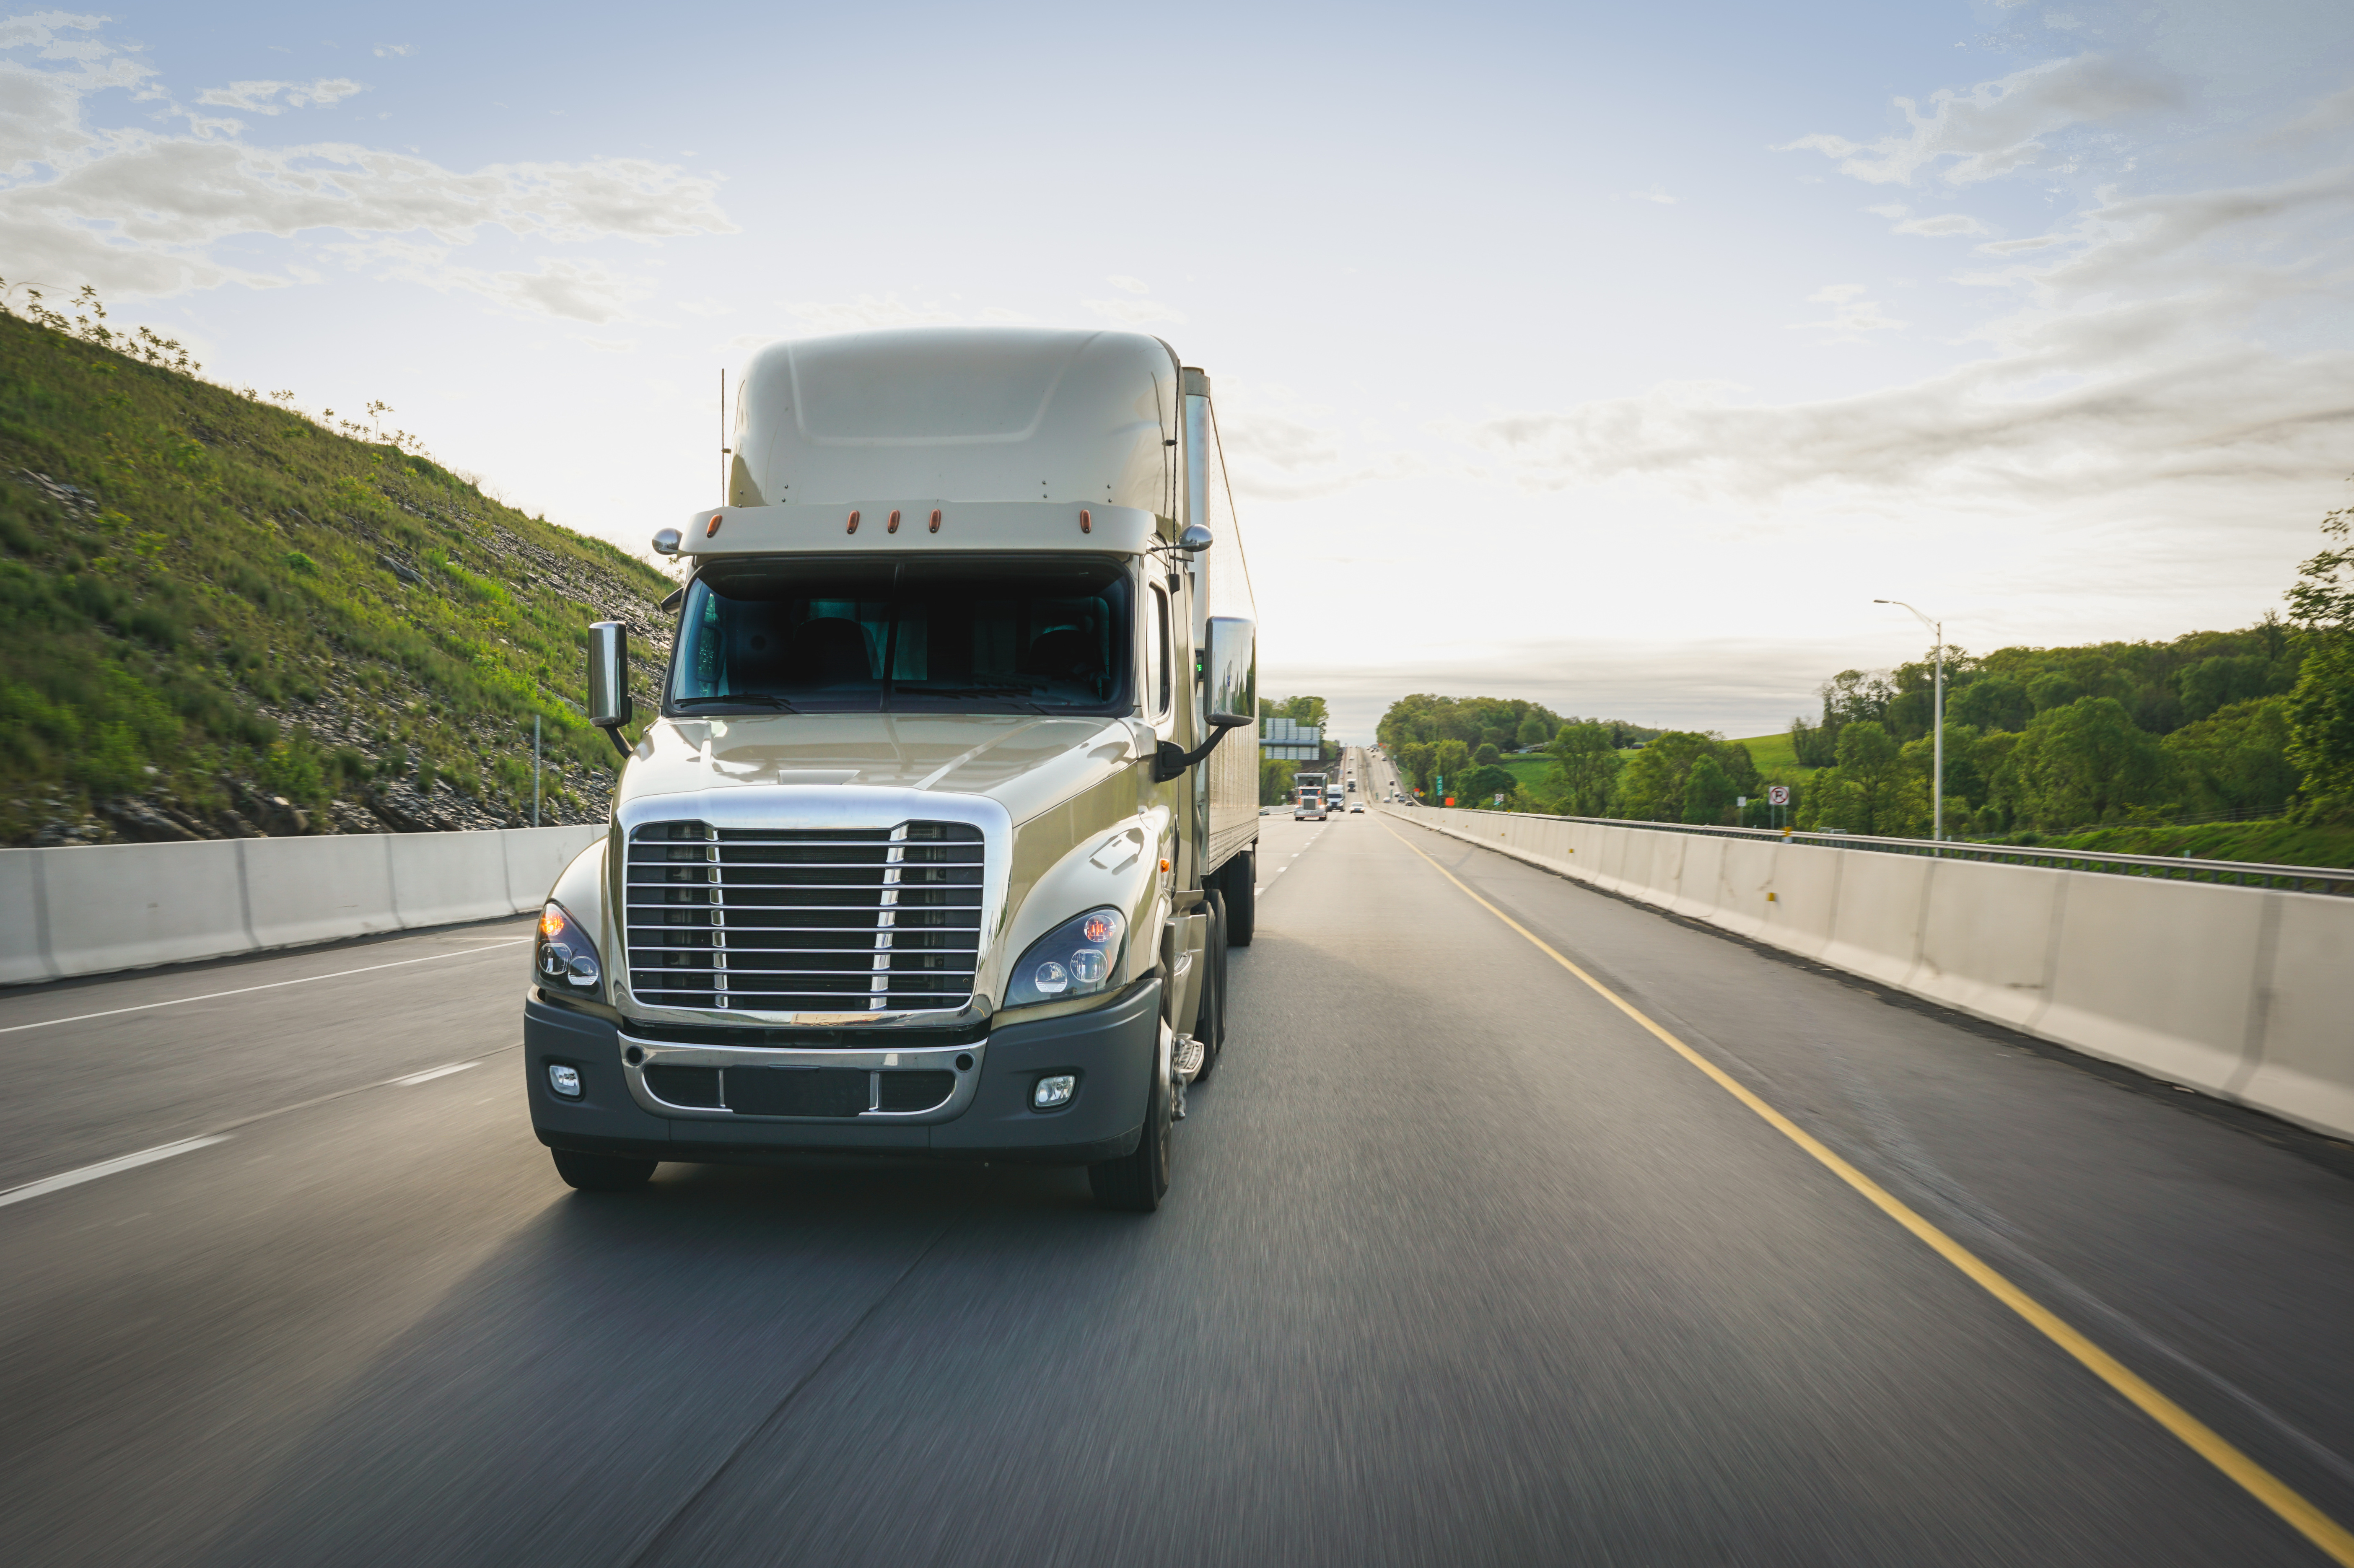 Premium Trucking Assets for Sale: Upgrade Your Fleet Today!